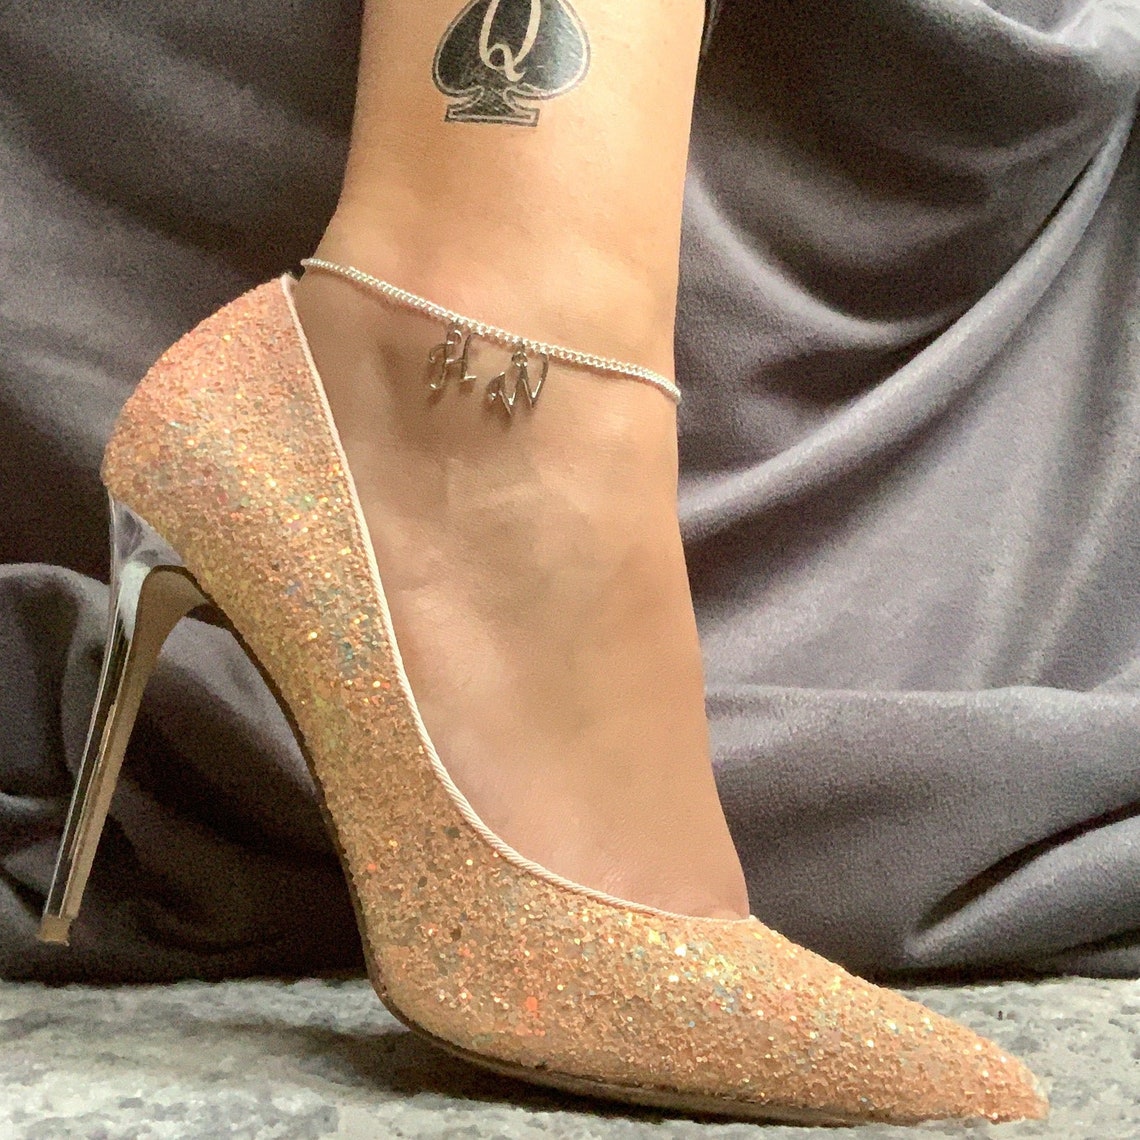 Hotwife Anklet Hot Wife Cuckold Anklet Swinger Lifestyle Etsy